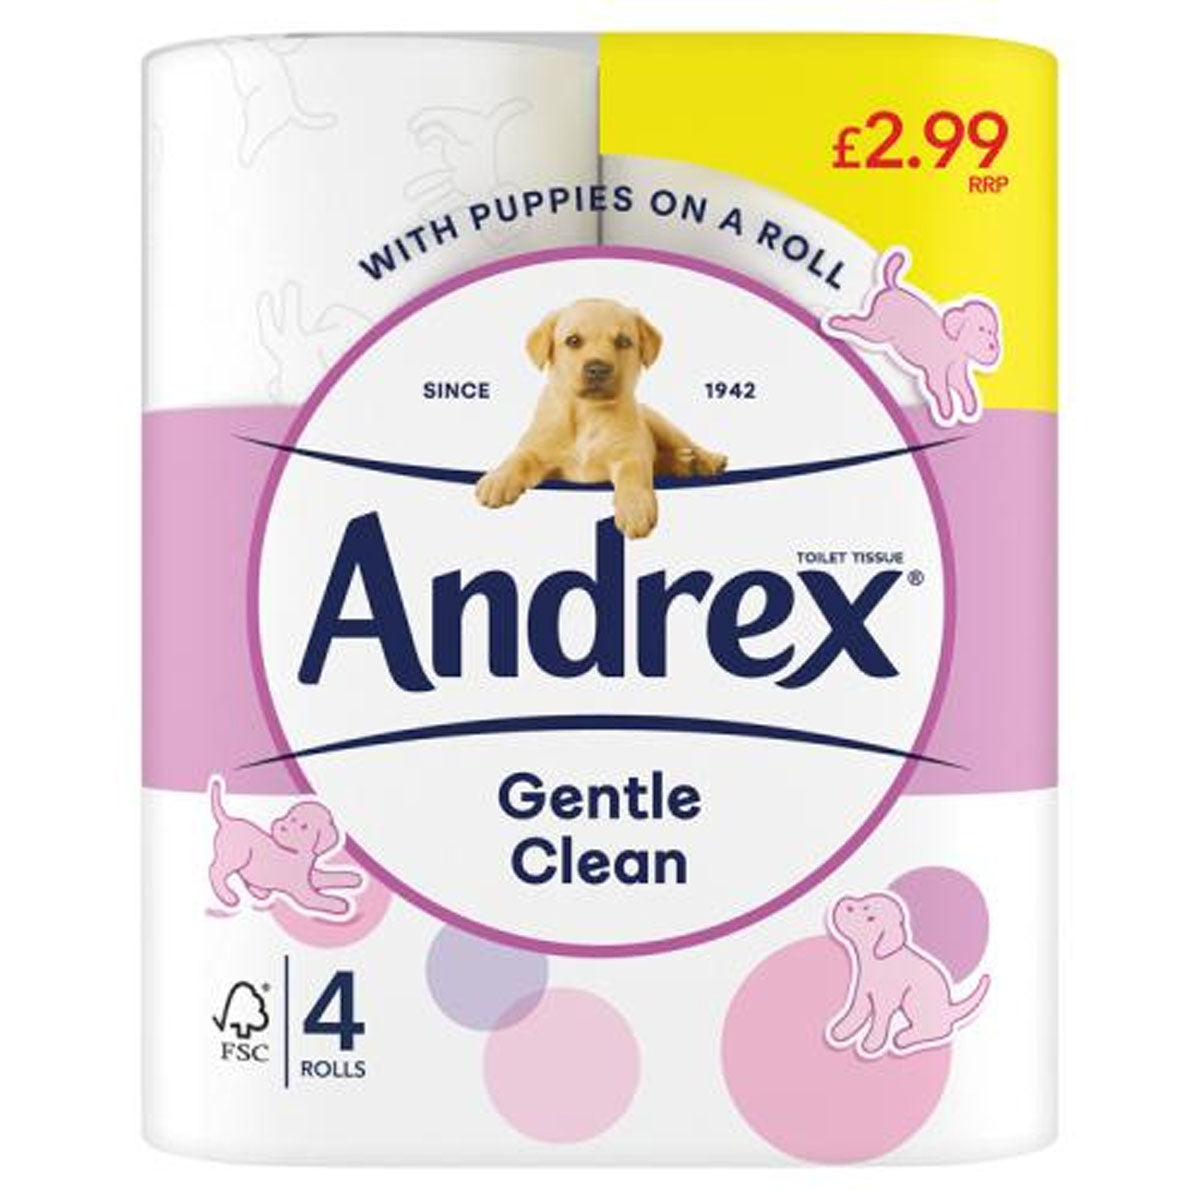 Andrex - Gentle Clean Toilet Tissue - 4 Rolls - Continental Food Store